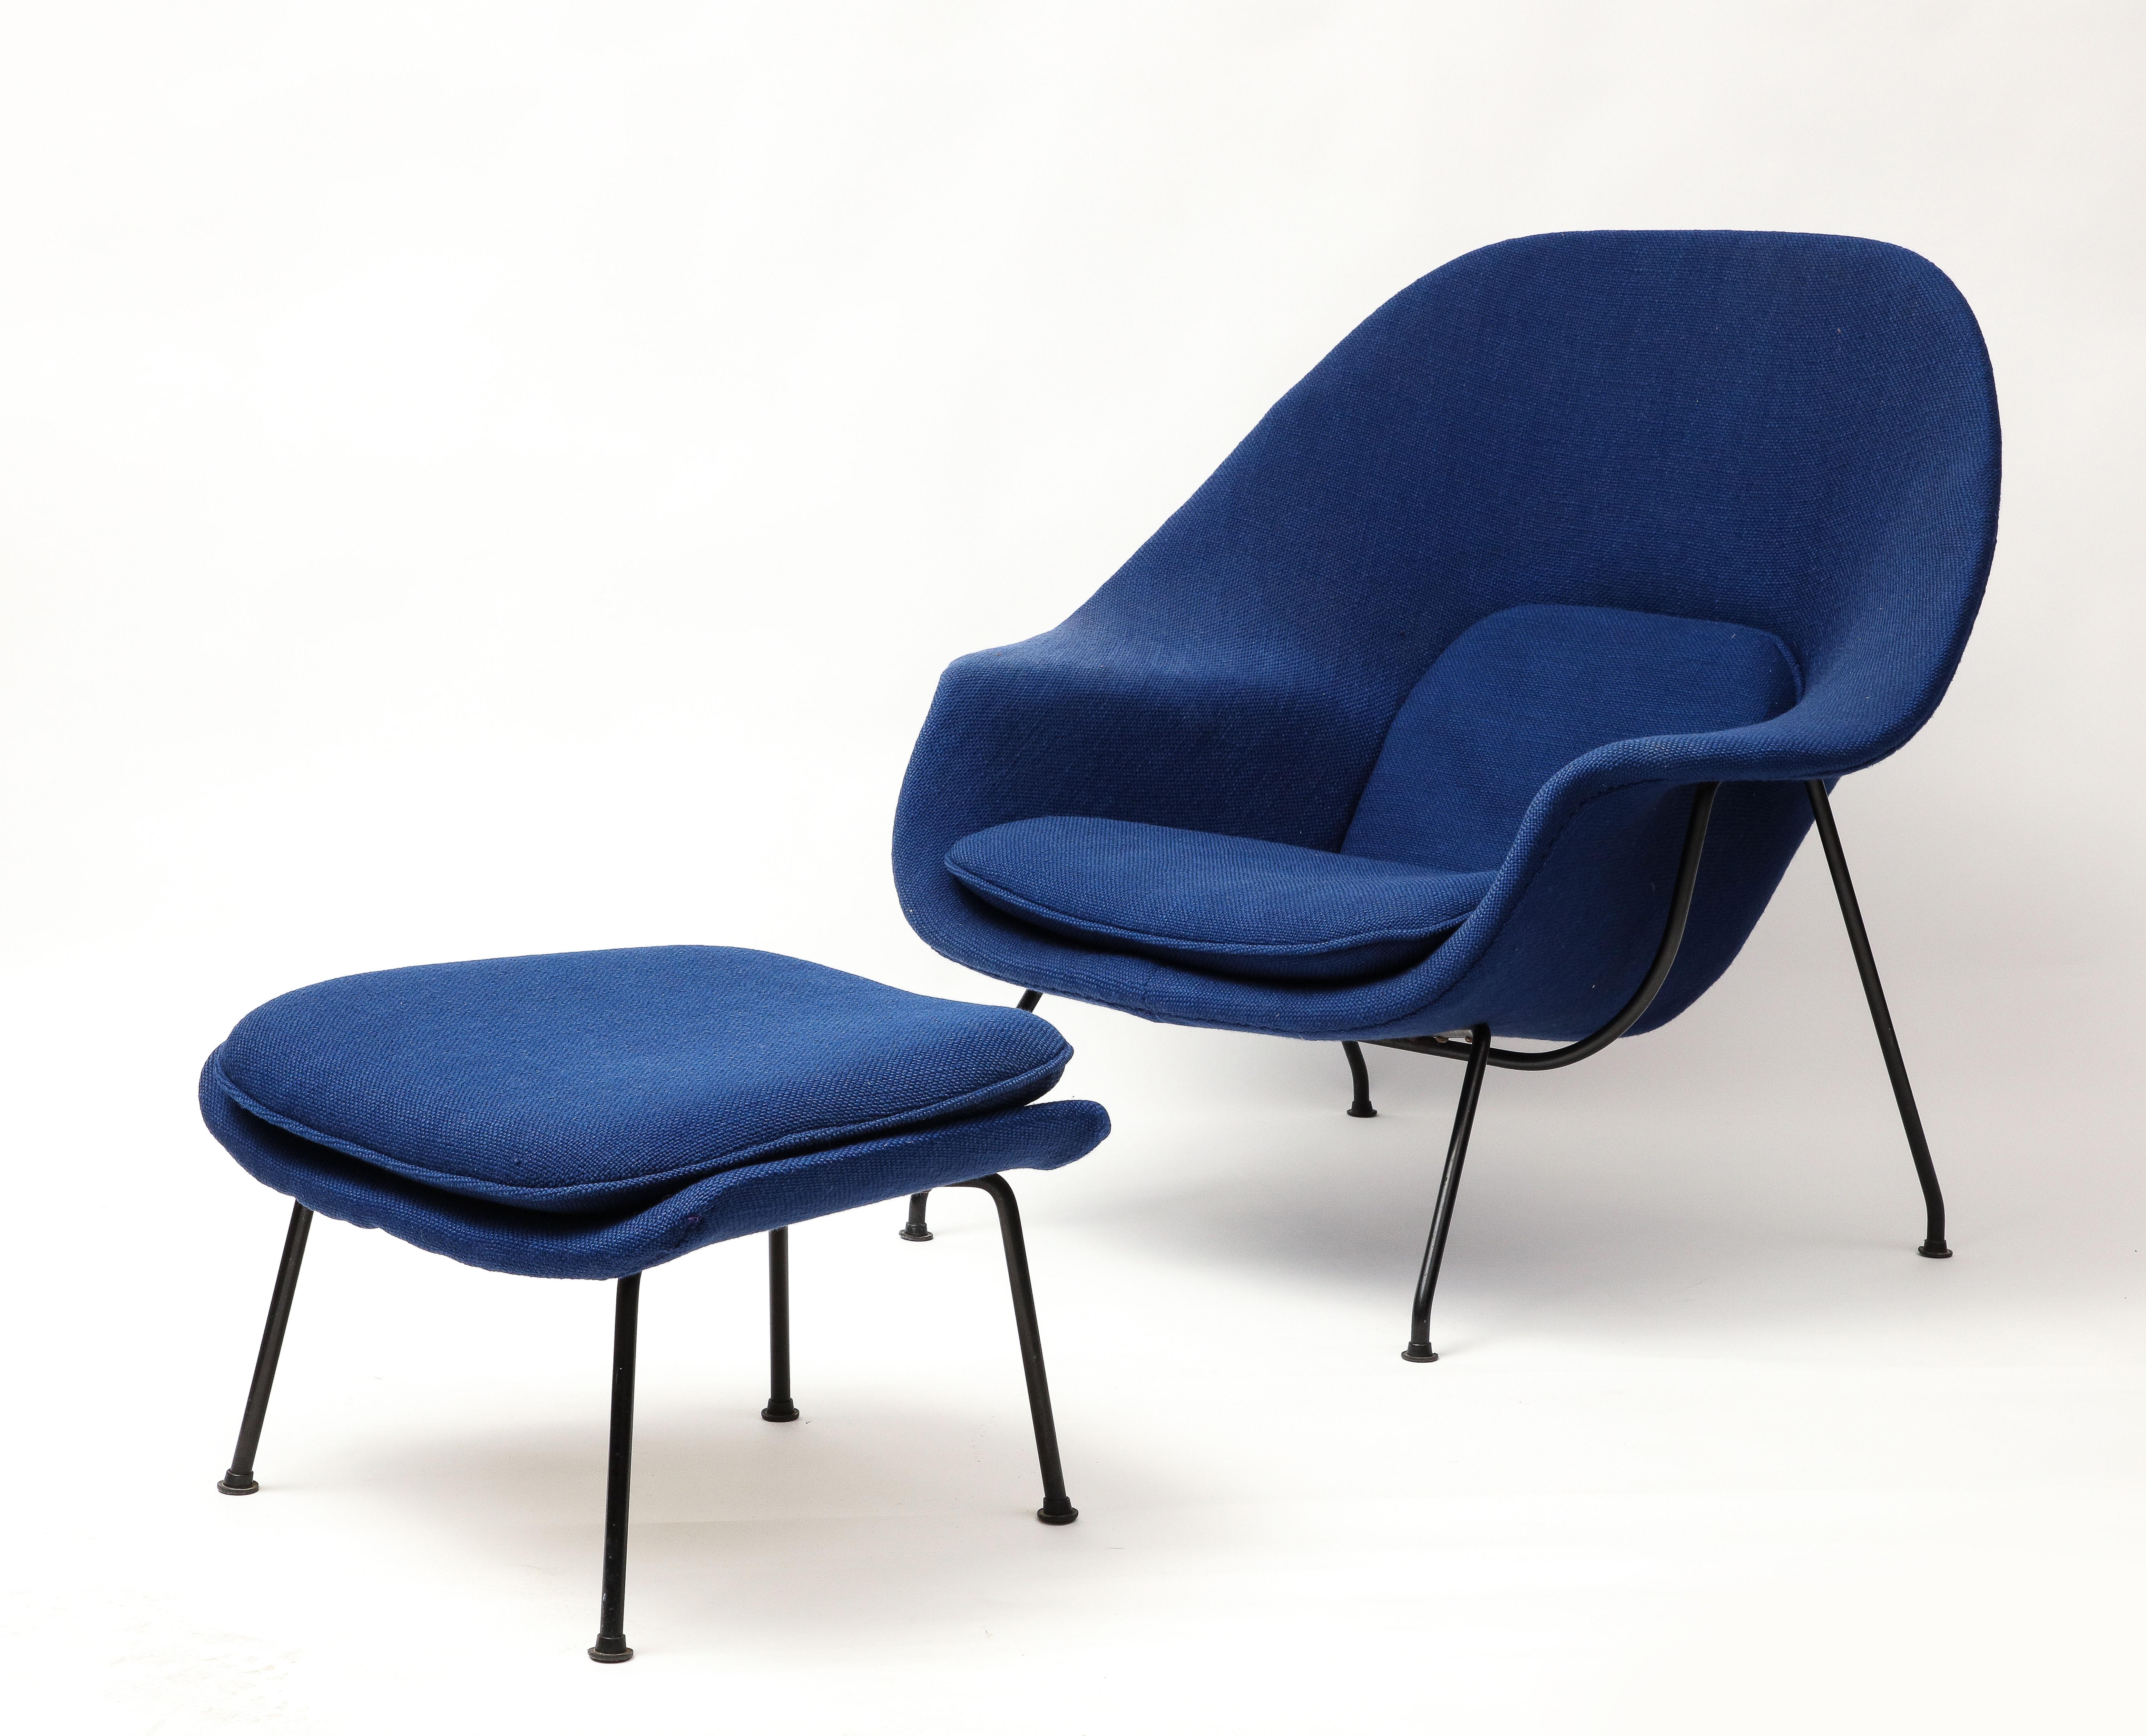 Early Eero Saarinen Knoll Womb Chair, Blue Upholstery, Black Wrought Iron Frame. Being sold as is. The chair is in original condition and will need new upholstery if you're planning on lounging in it. The foam is hard (fried inside) in several spots